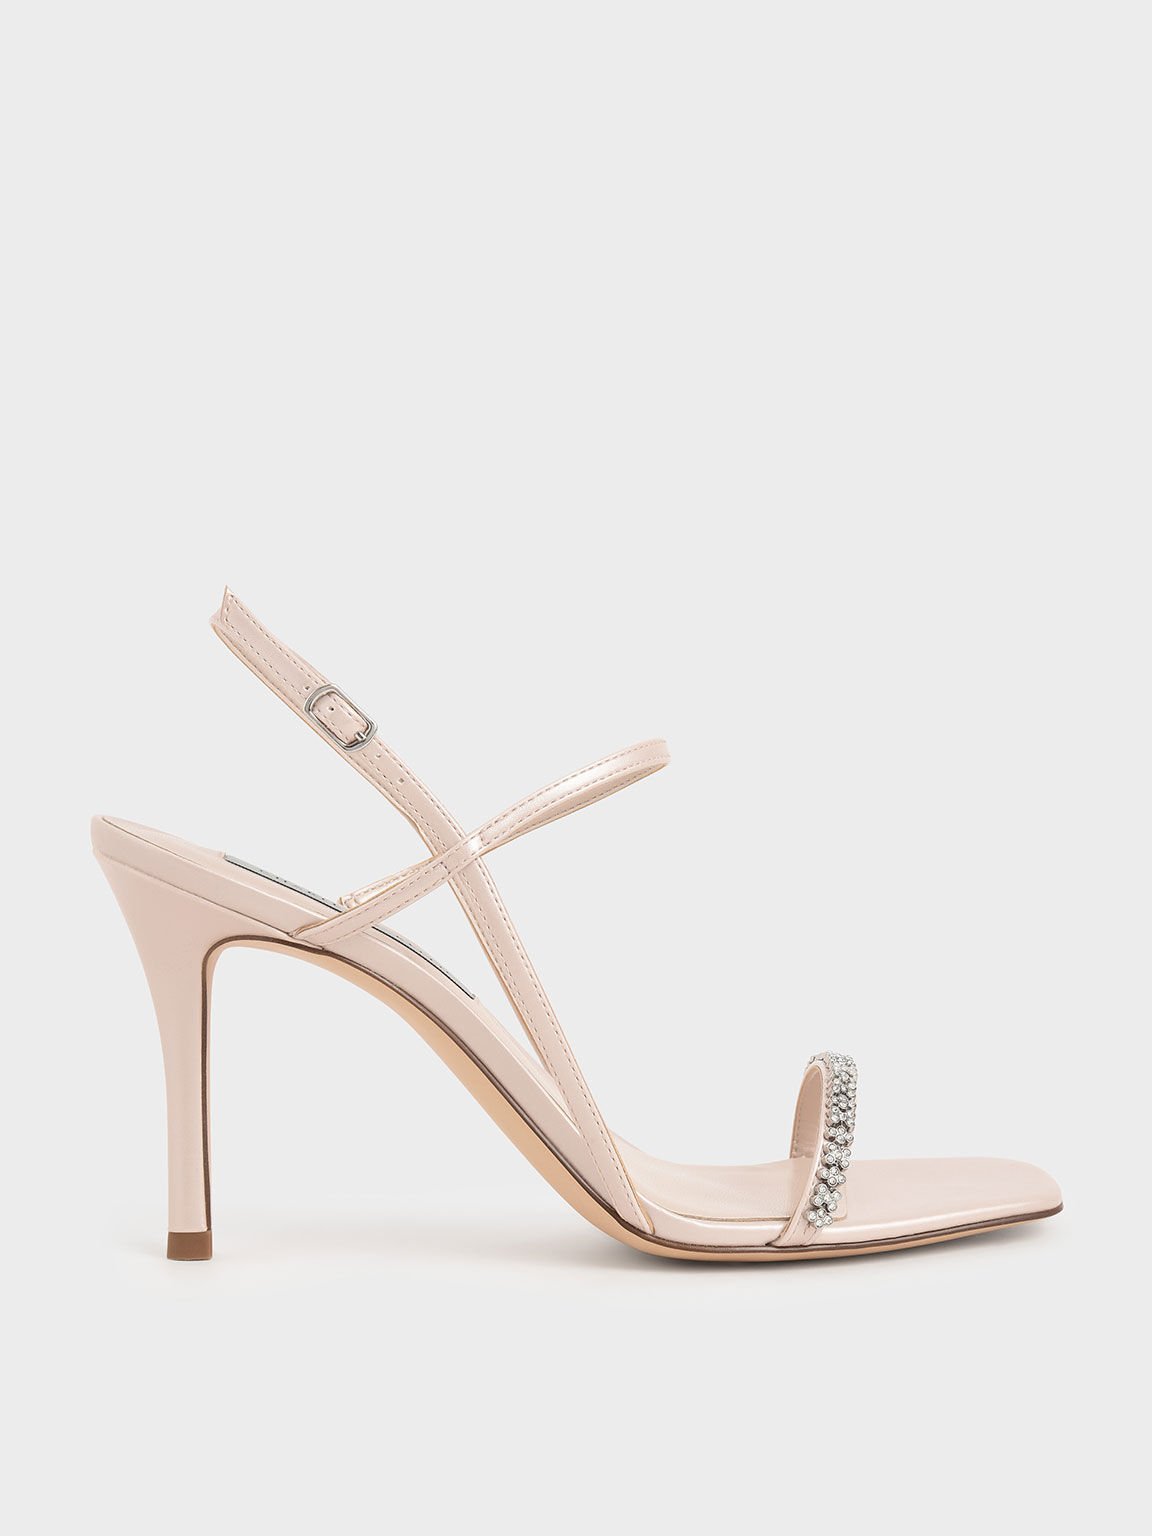 Degree Celsius Inward Authorization Nude Gem-Embellished Strappy Sandals - CHARLES & KEITH US